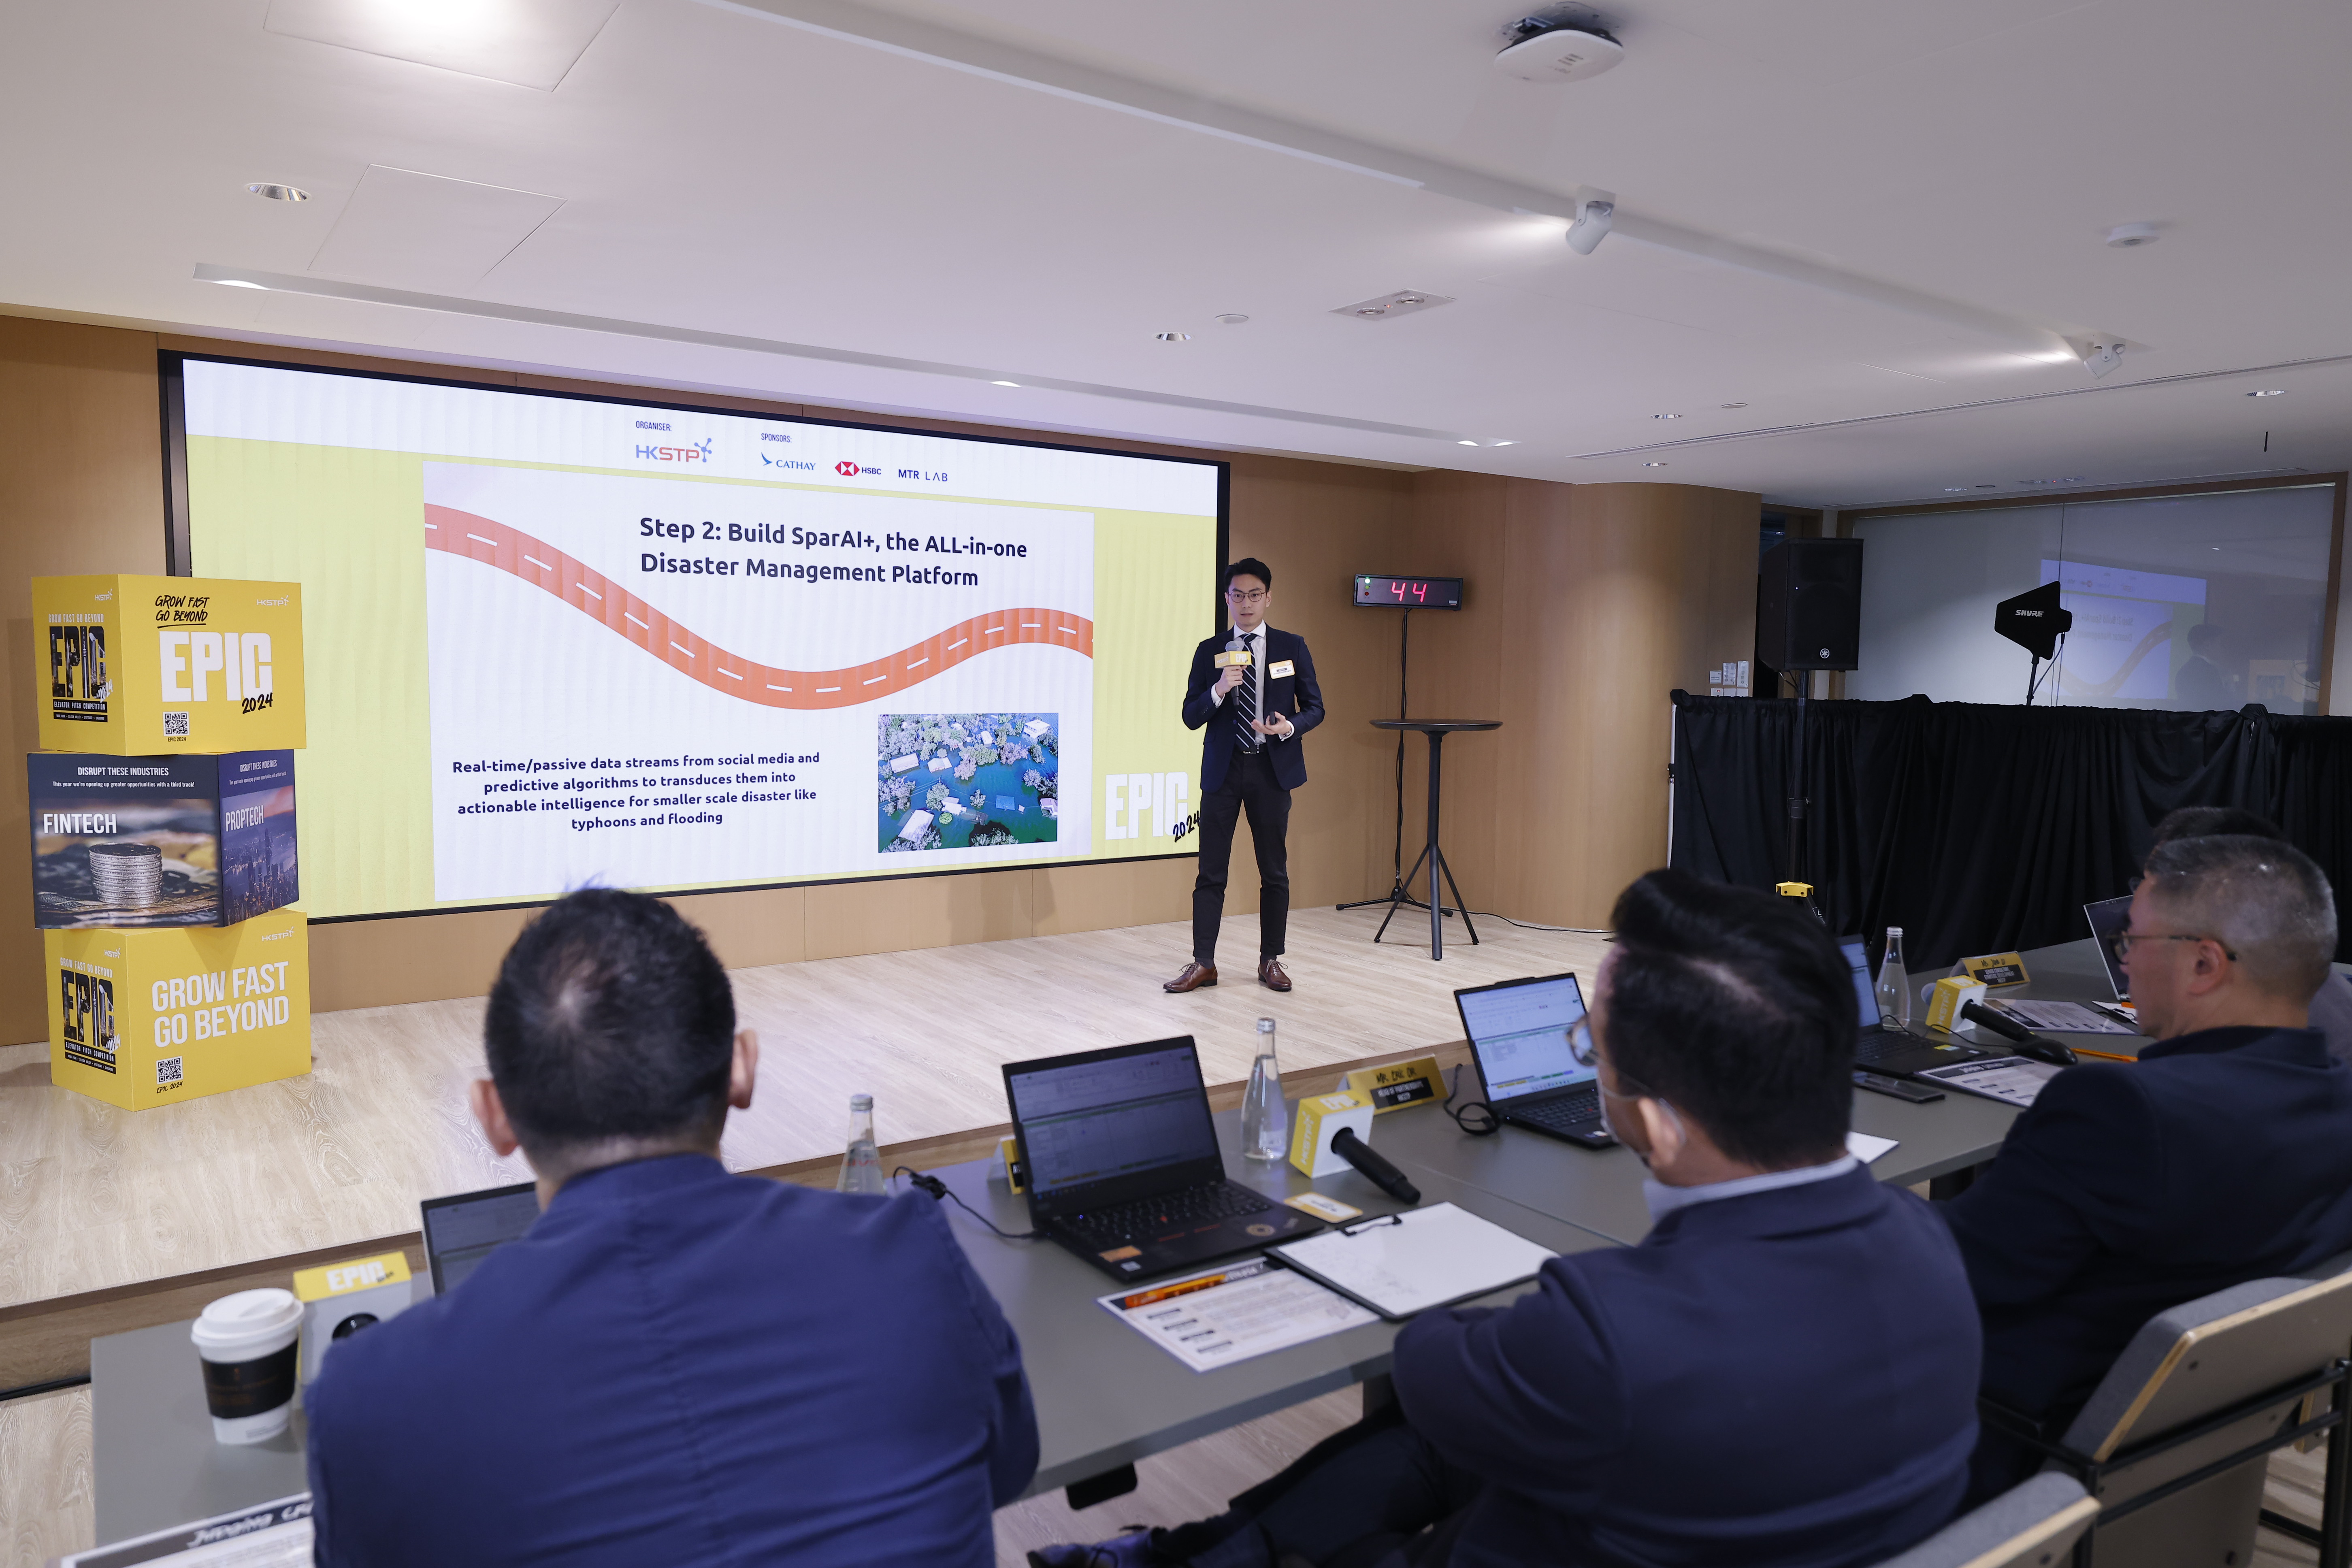 Photo 4: Featured startups showcased FinTech, PropTech and MobilityTech innovations in EPiC 2024 Hong Kong Semi-Final Contest